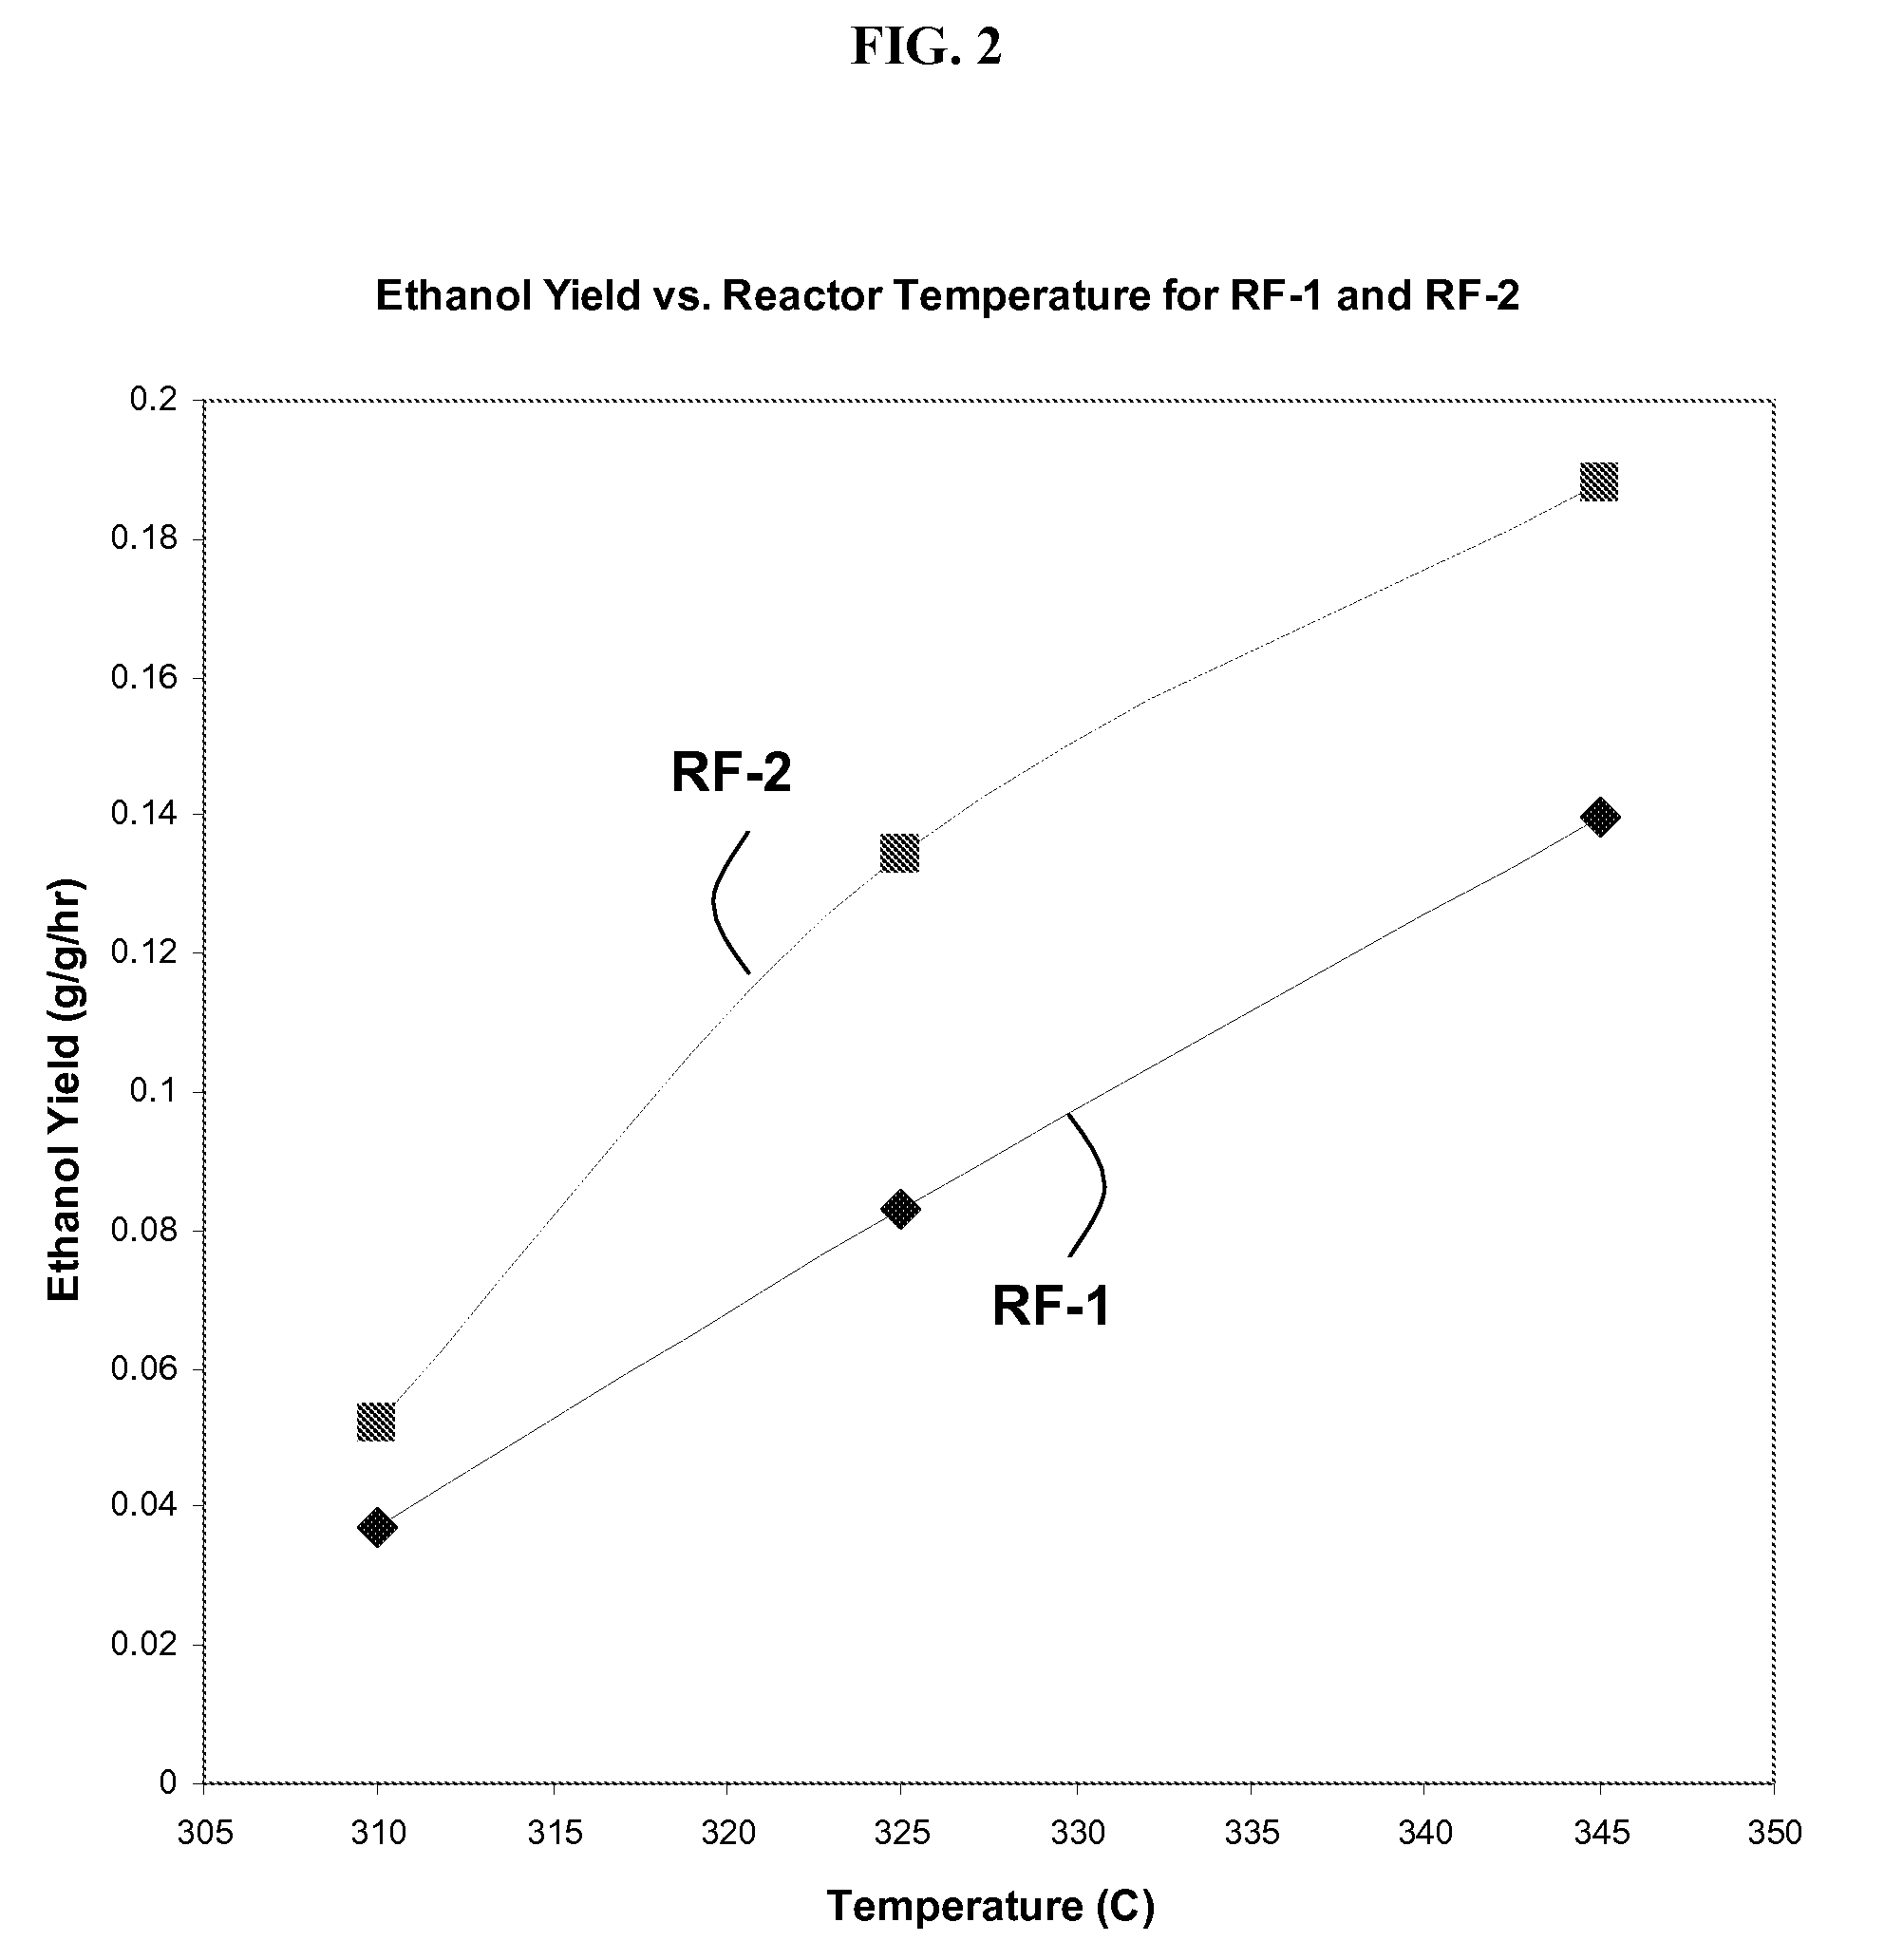 Cobalt-molybdenum sulfide catalyst materials and methods for ethanol production from syngas